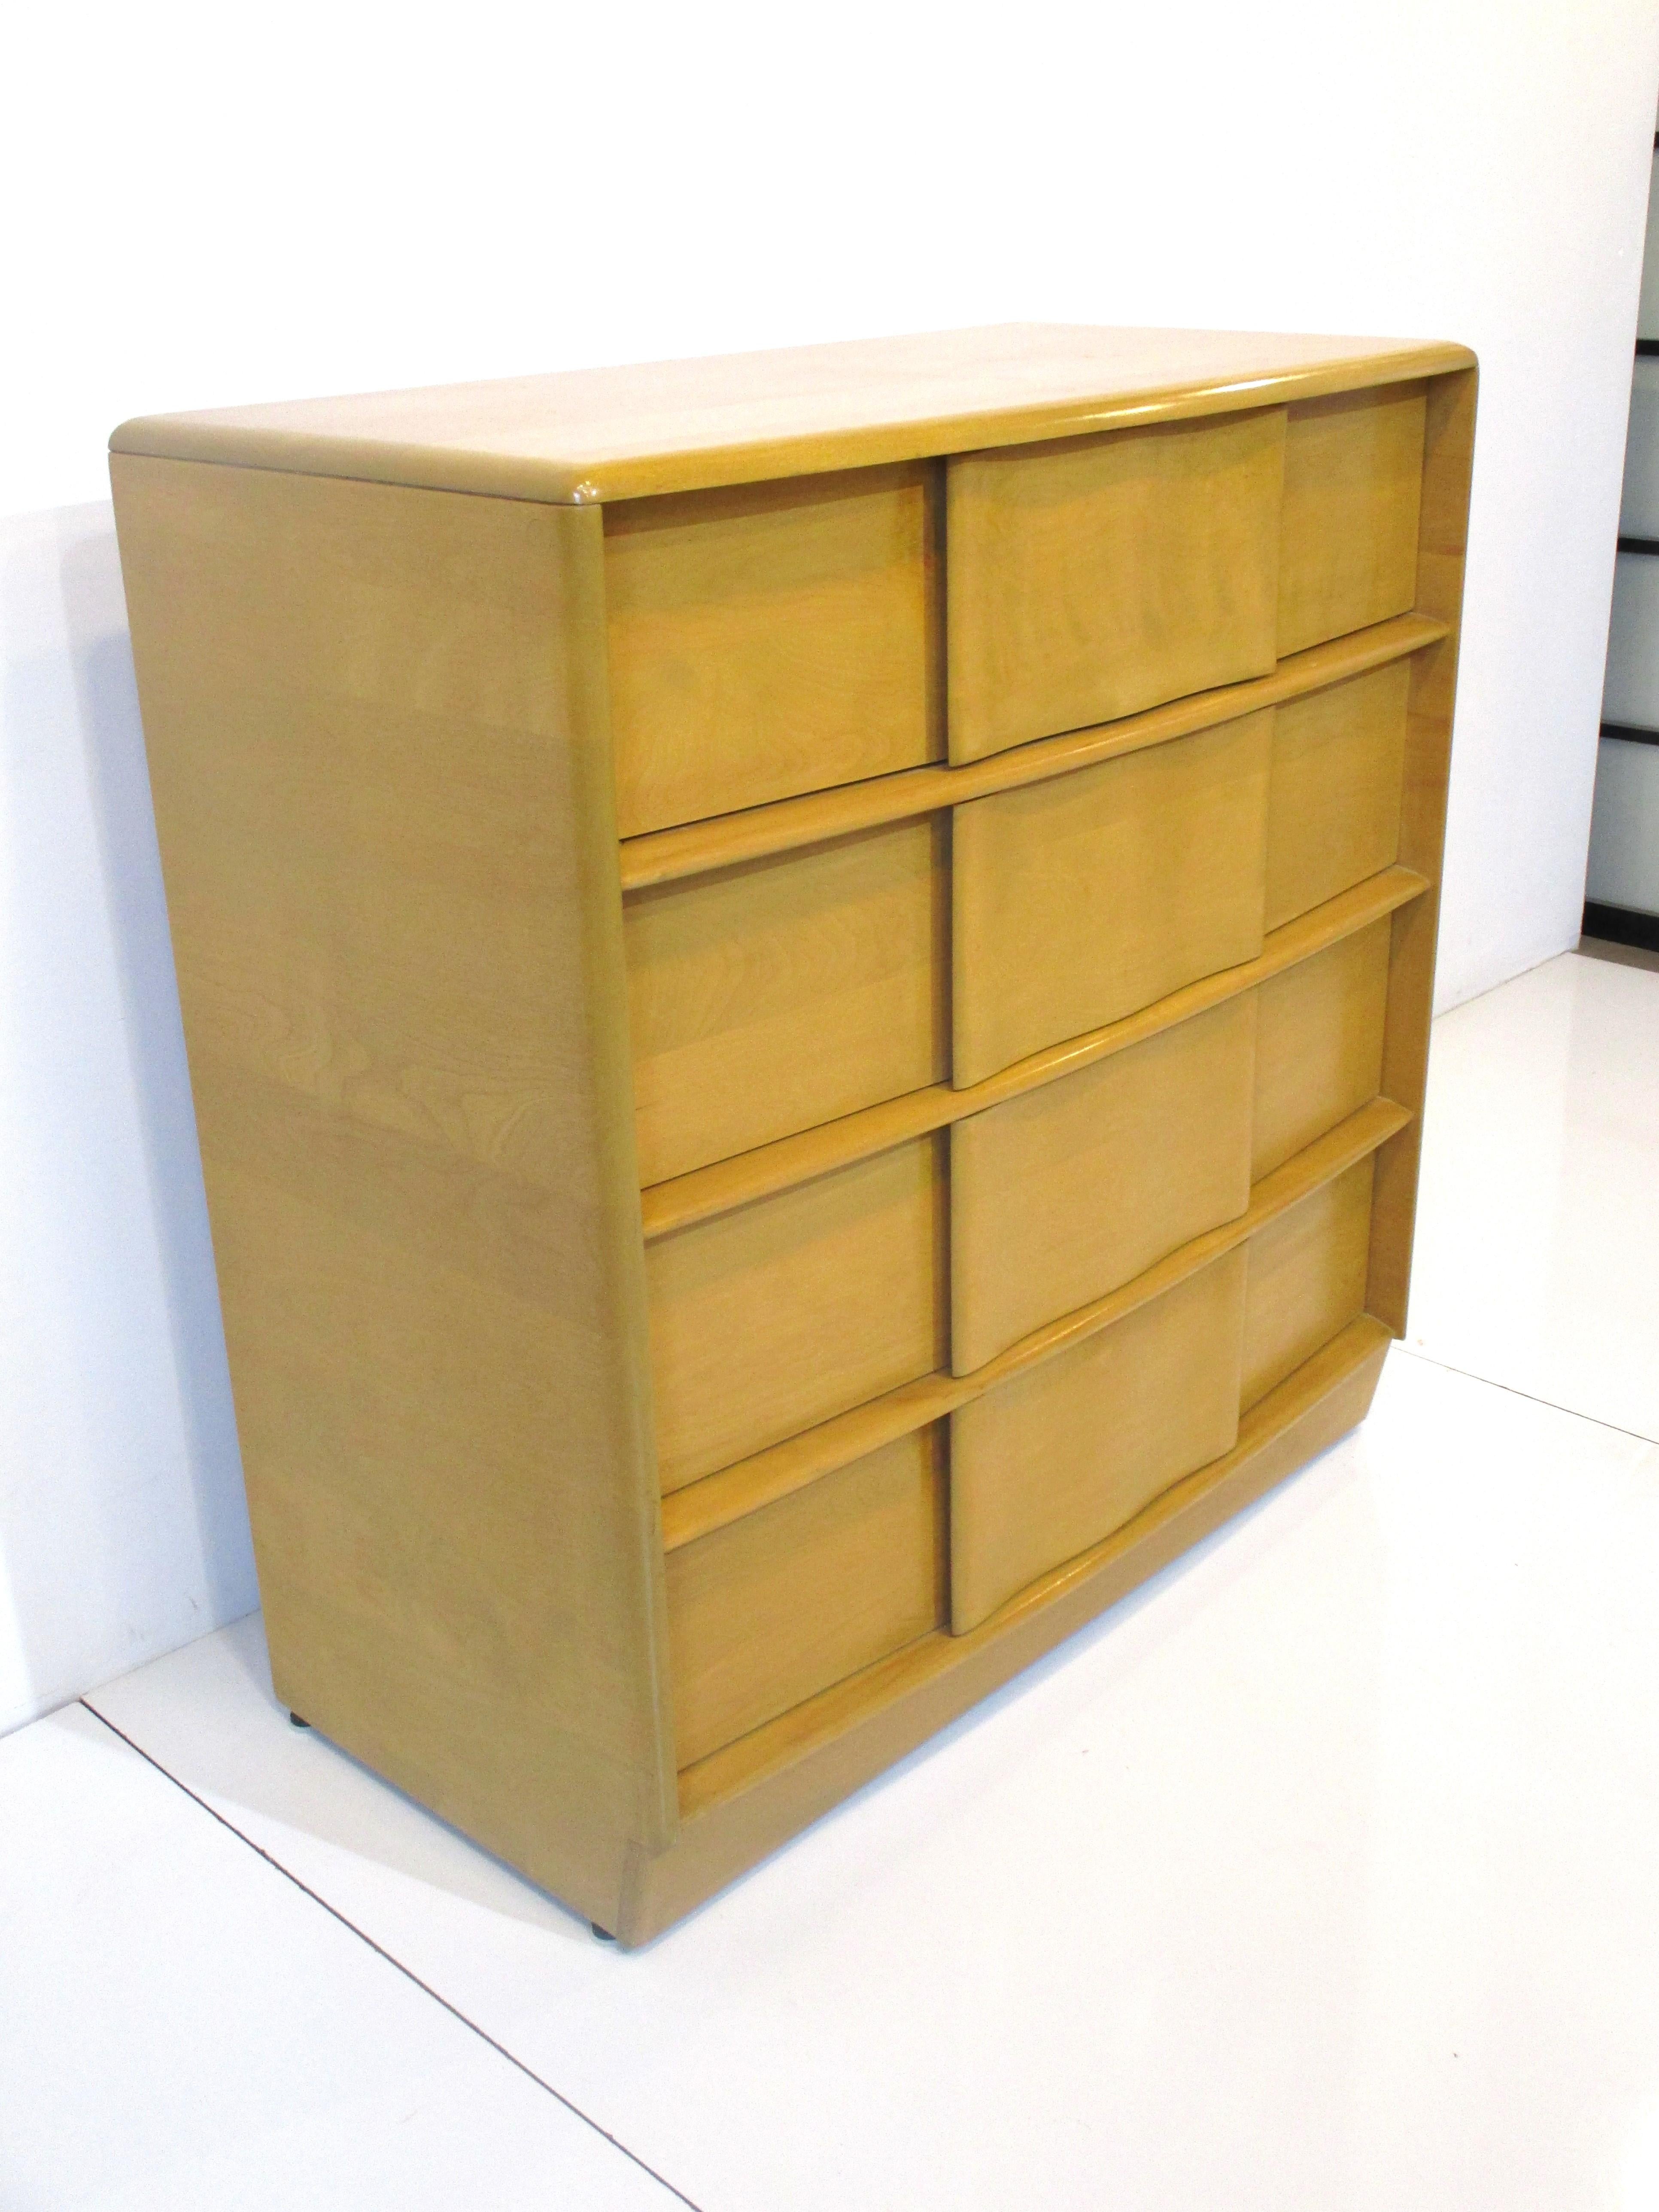 A solid maple wood tall four drawer dresser chest in a smaller scale with ribbon like sculptural drawers. The handles are integrated into the front making for a very clean aesthetic, designed by Ernest Herrmann and Leo Jiranek from the Sculptura